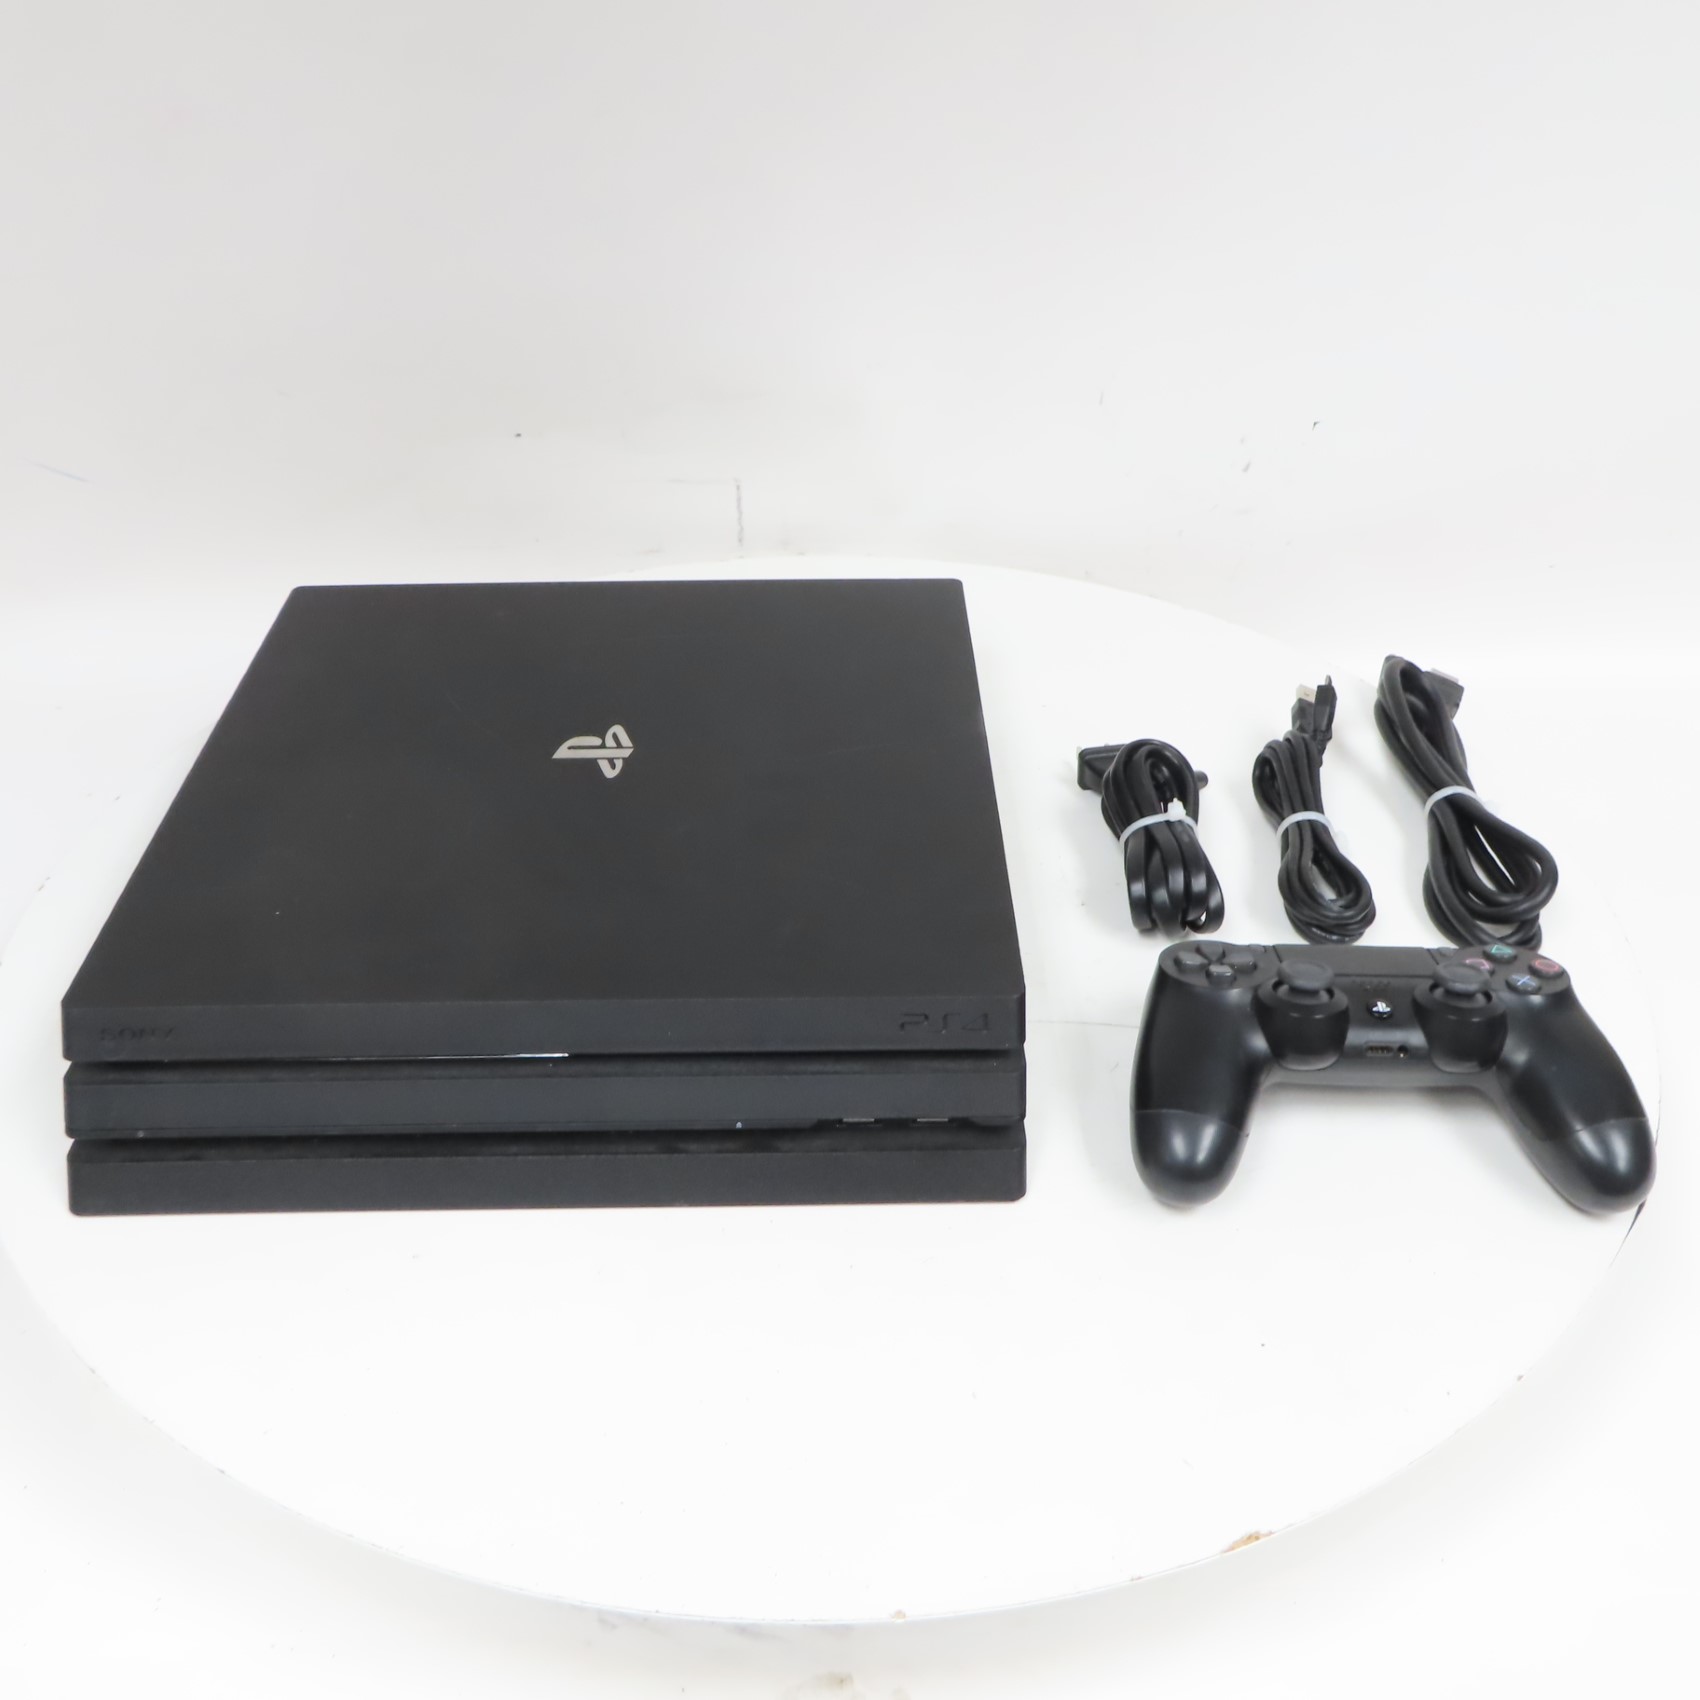  PlayStation 4 Pro 1TB Console : Video Games